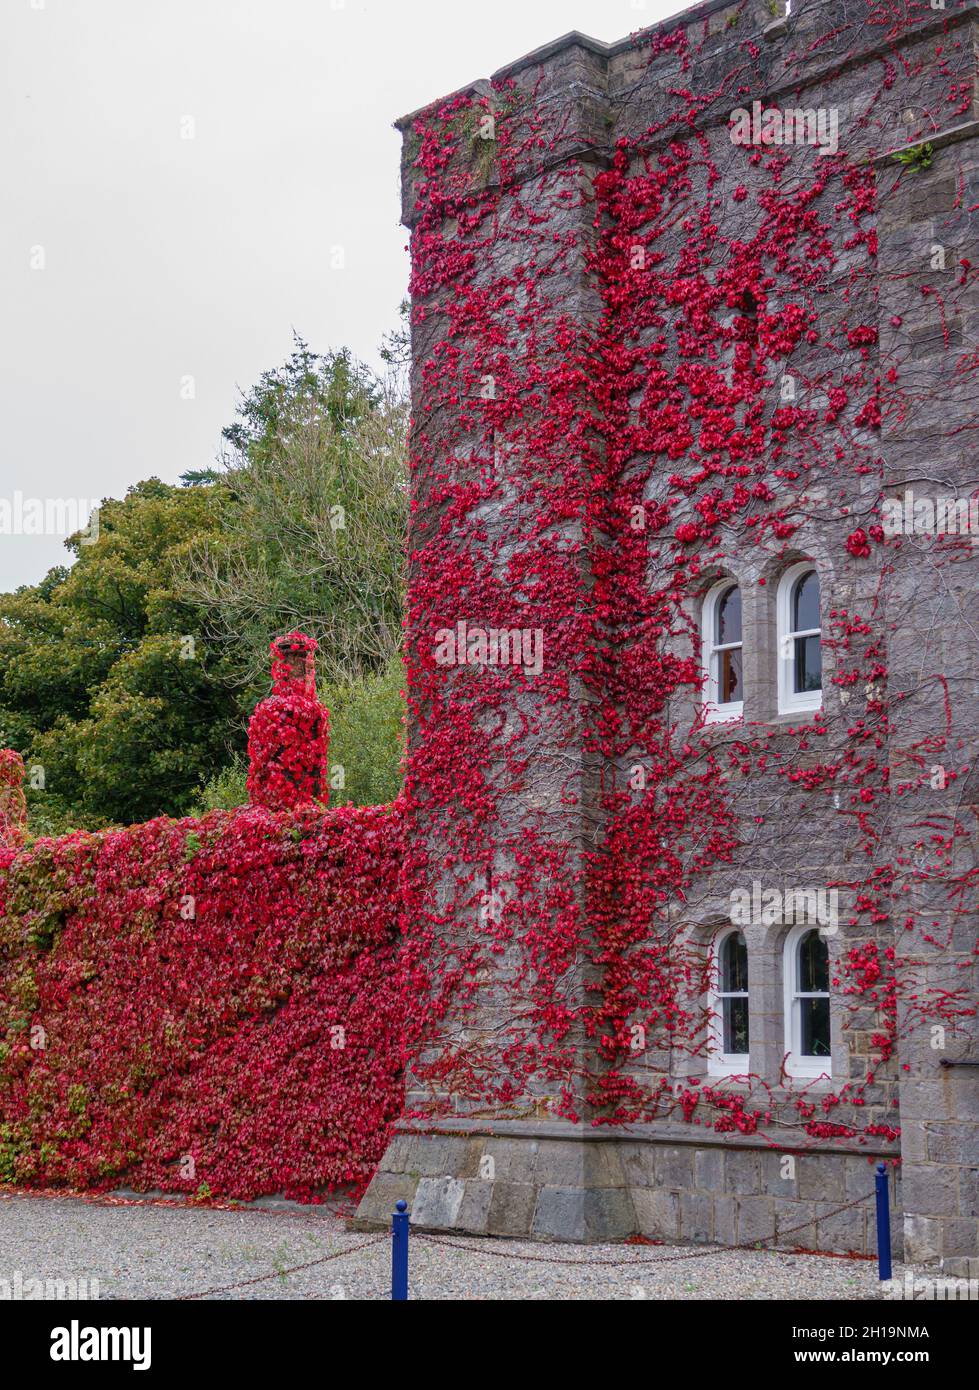 Virginia creeper (Parthenocissus quinquefolia) climbing the walls of Penrhyn Castle, a country house in Llandygai Bangor Wales UK Stock Photo